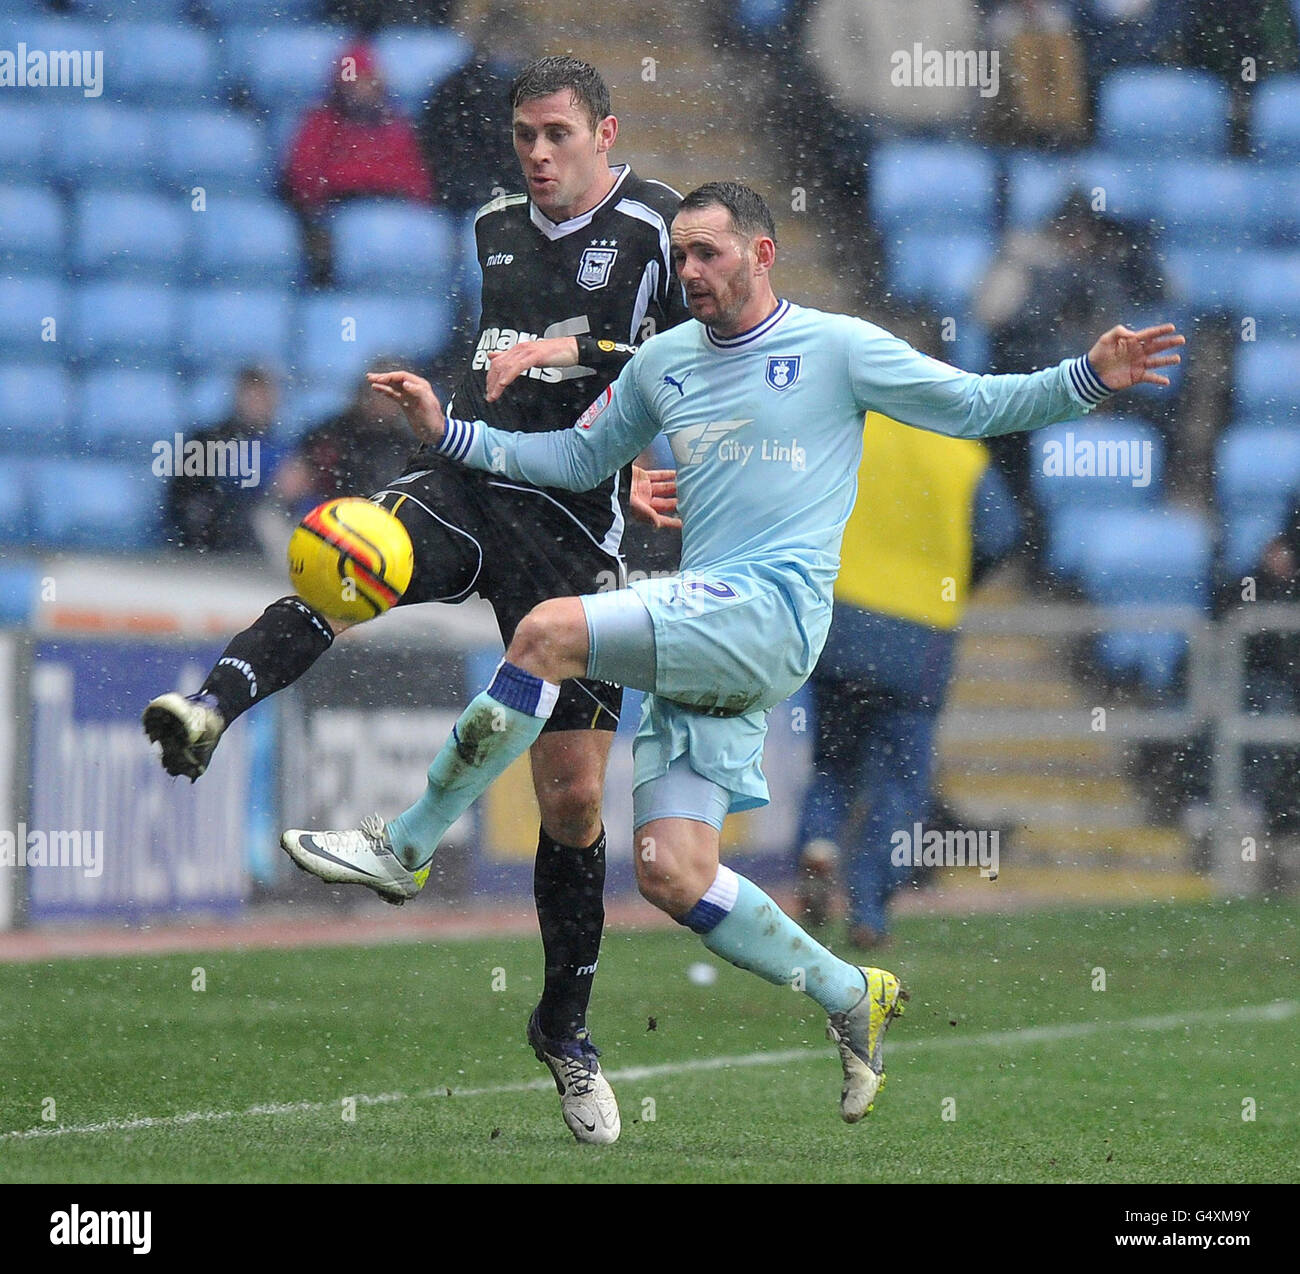 Coventry City's David Bell and Ipswich Town's Andy Drury battle for the ball during the npower Football League League Championship match at the Ricoh Arena, Coventry. Stock Photo